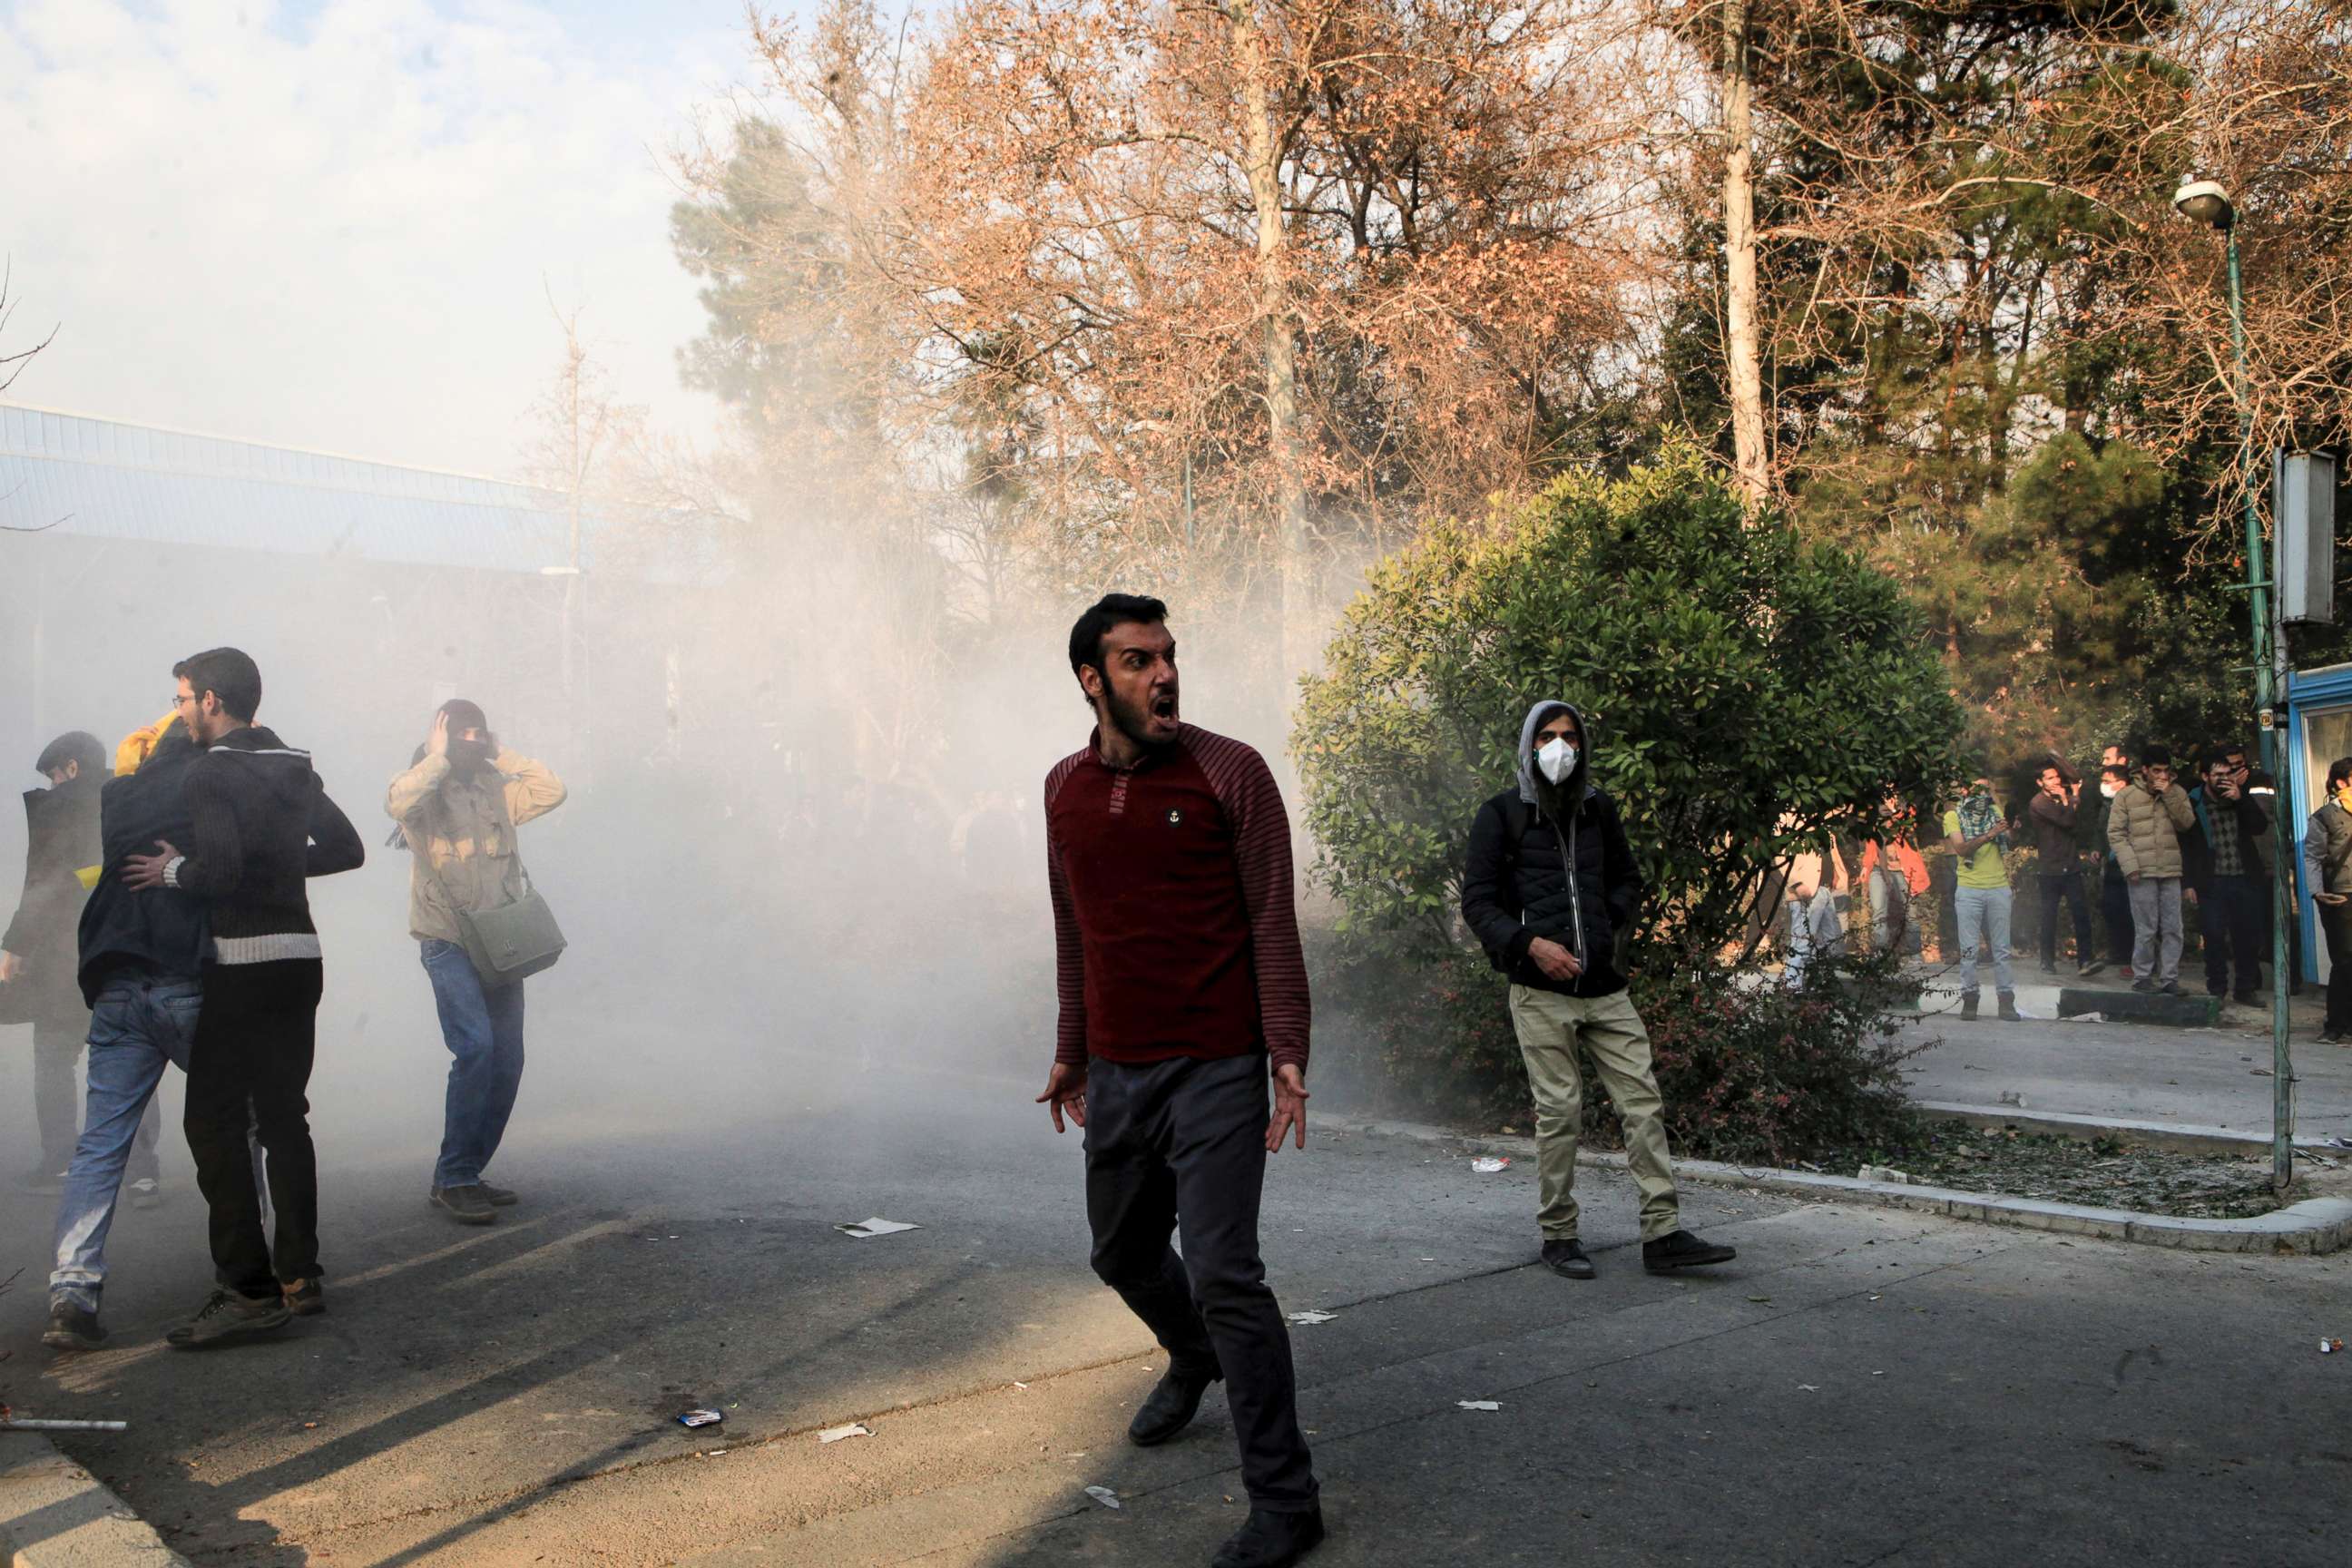 PHOTO: University students attend a protest inside Tehran University while a smoke grenade is thrown by anti-riot Iranian police, in Tehran, Iran, Dec. 30, 2017, in a photo obtained by AP.